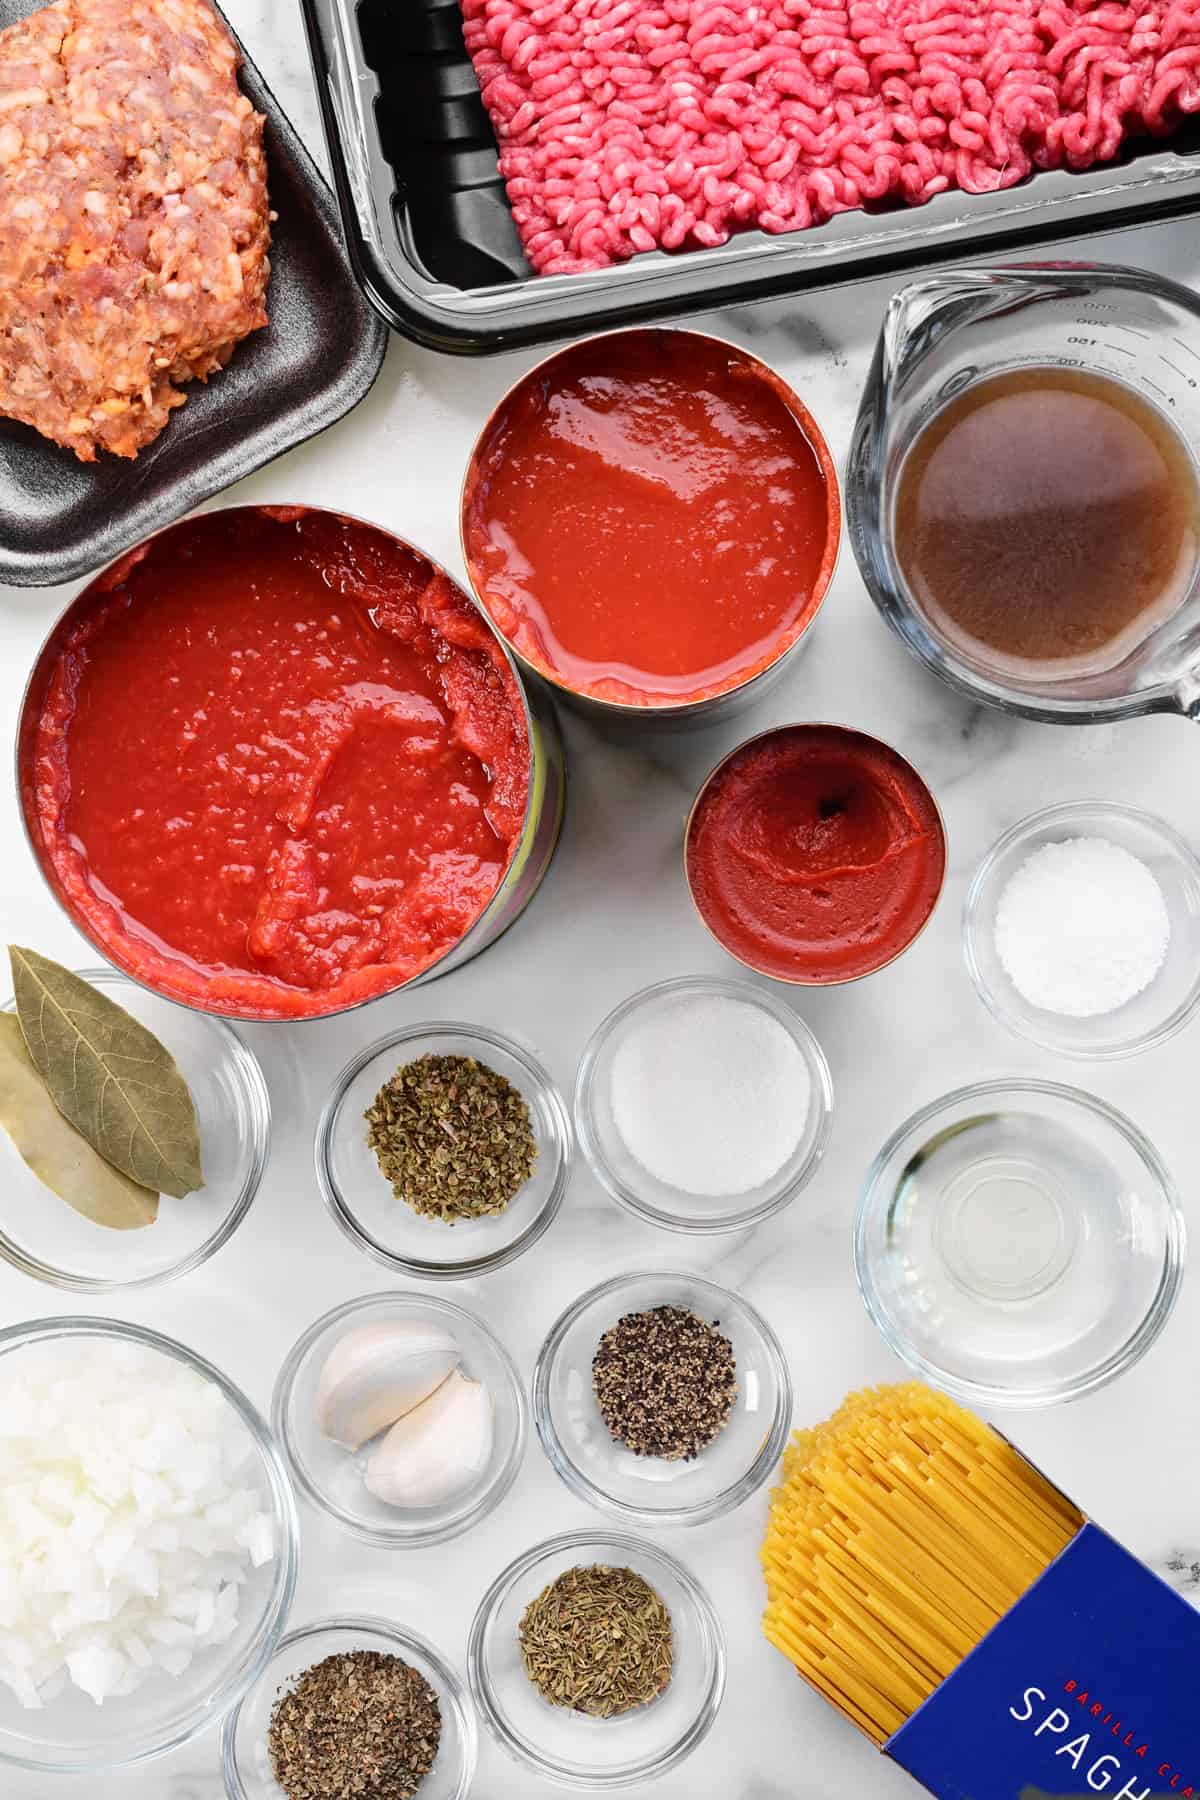 meat, sauces, and spices in bowls on a marble countertop.